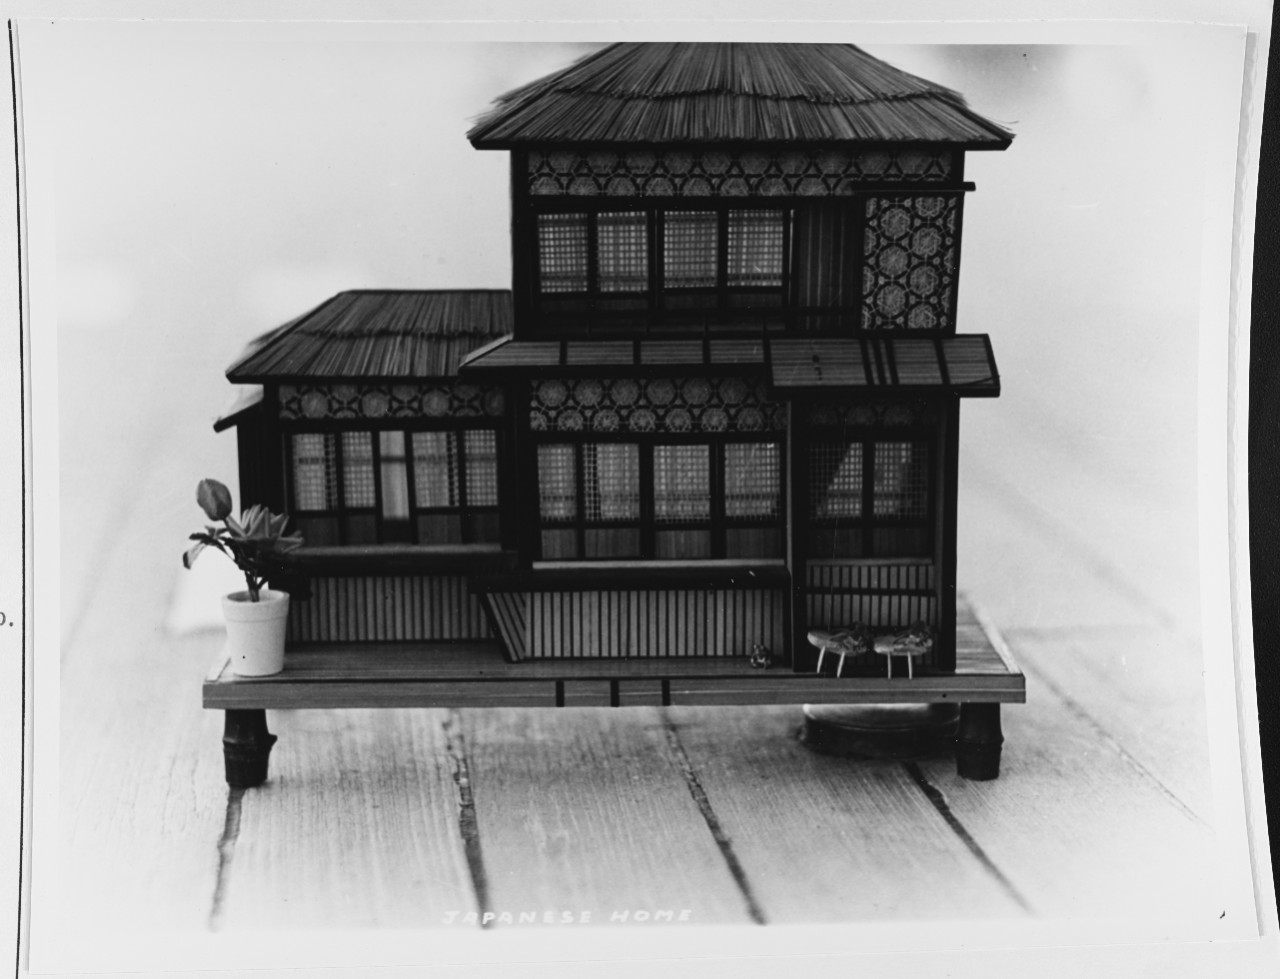 Model of a typical Japanese house.